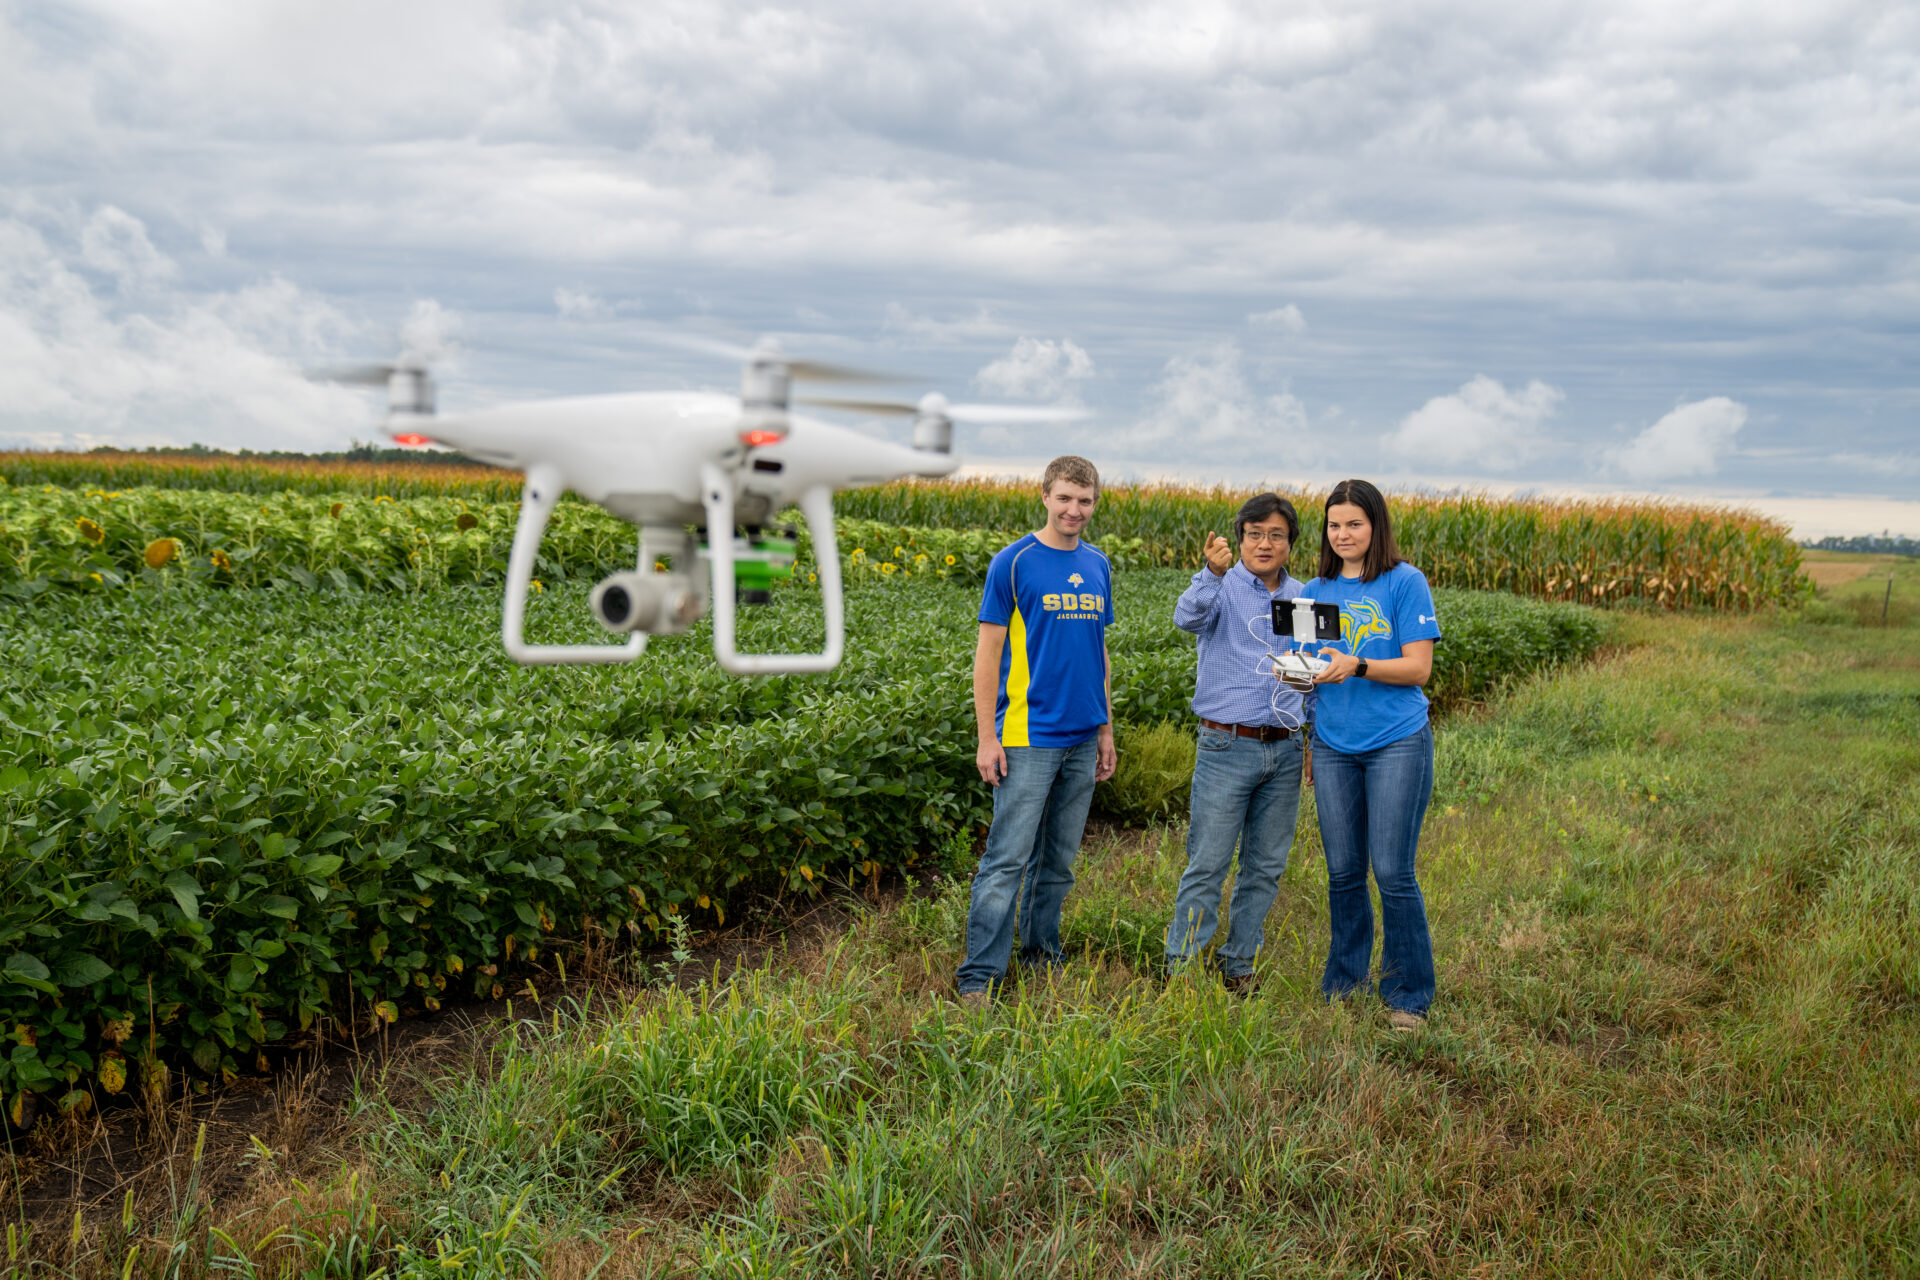 two students and a professor fly a drone over an agricultural field